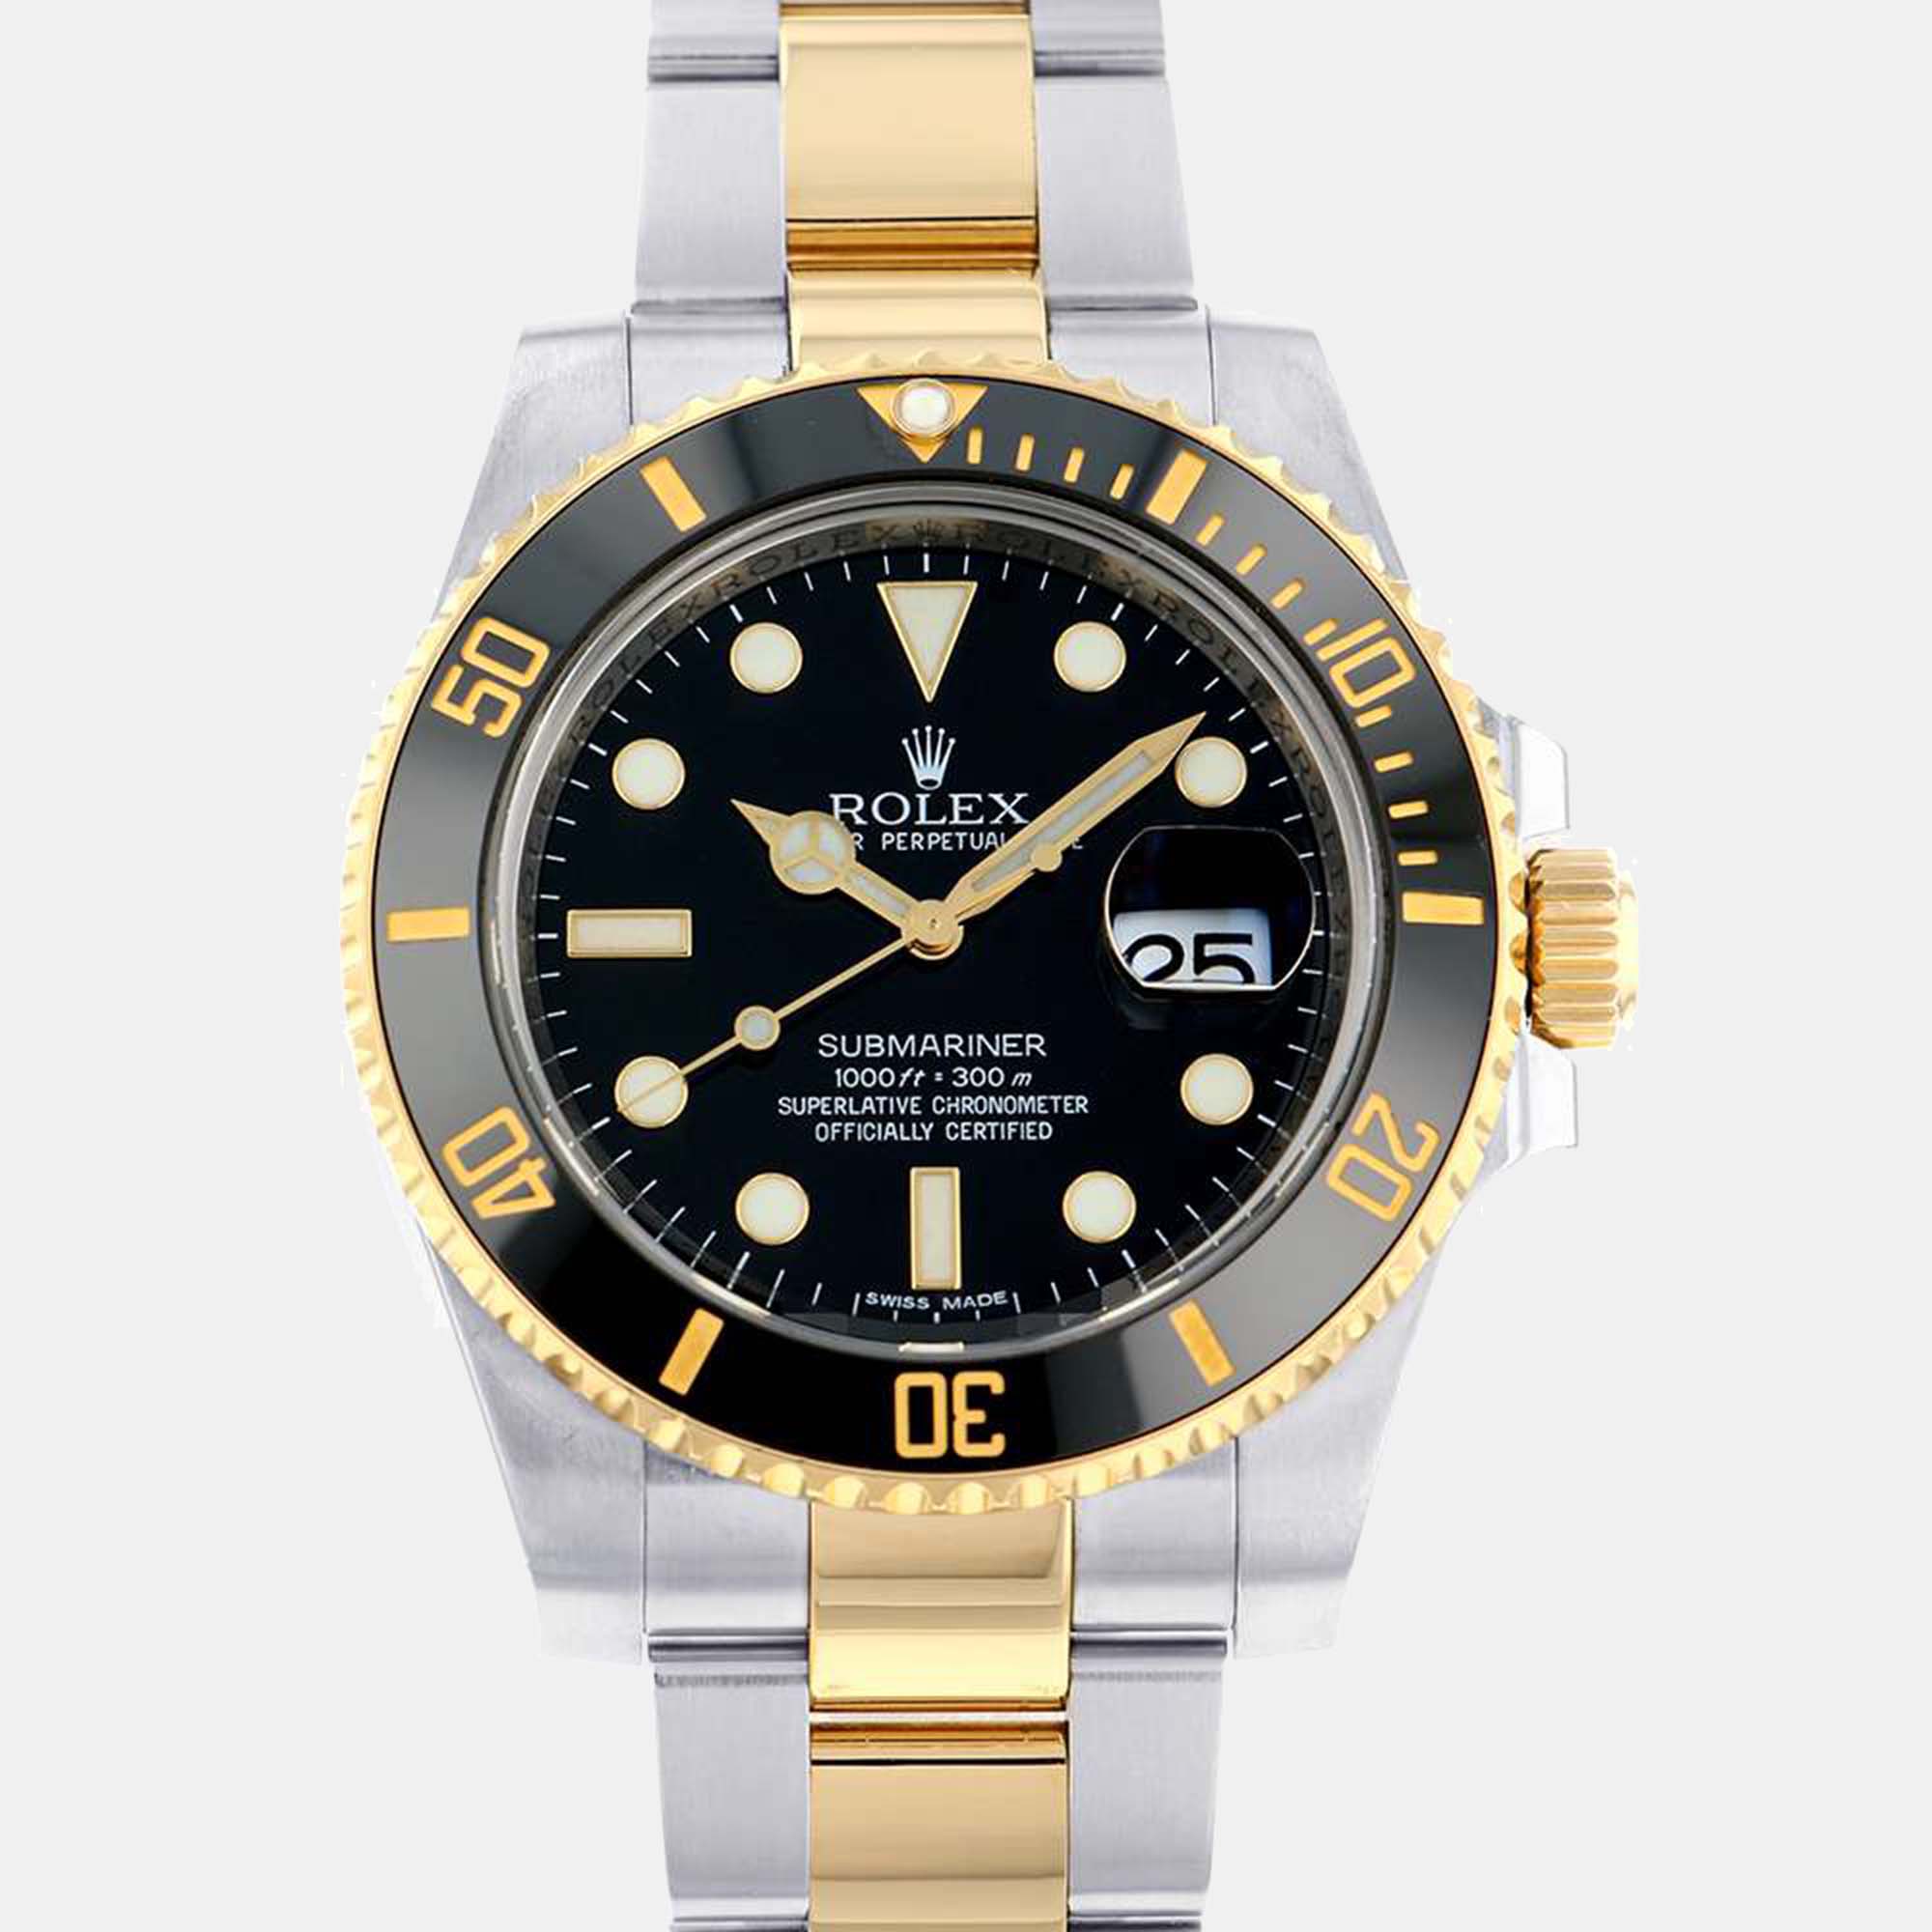 Rolex Black 18k Yellow Gold And Stainless Steel Submariner 116613 Automatic Men's Wristwatch 40 Mm